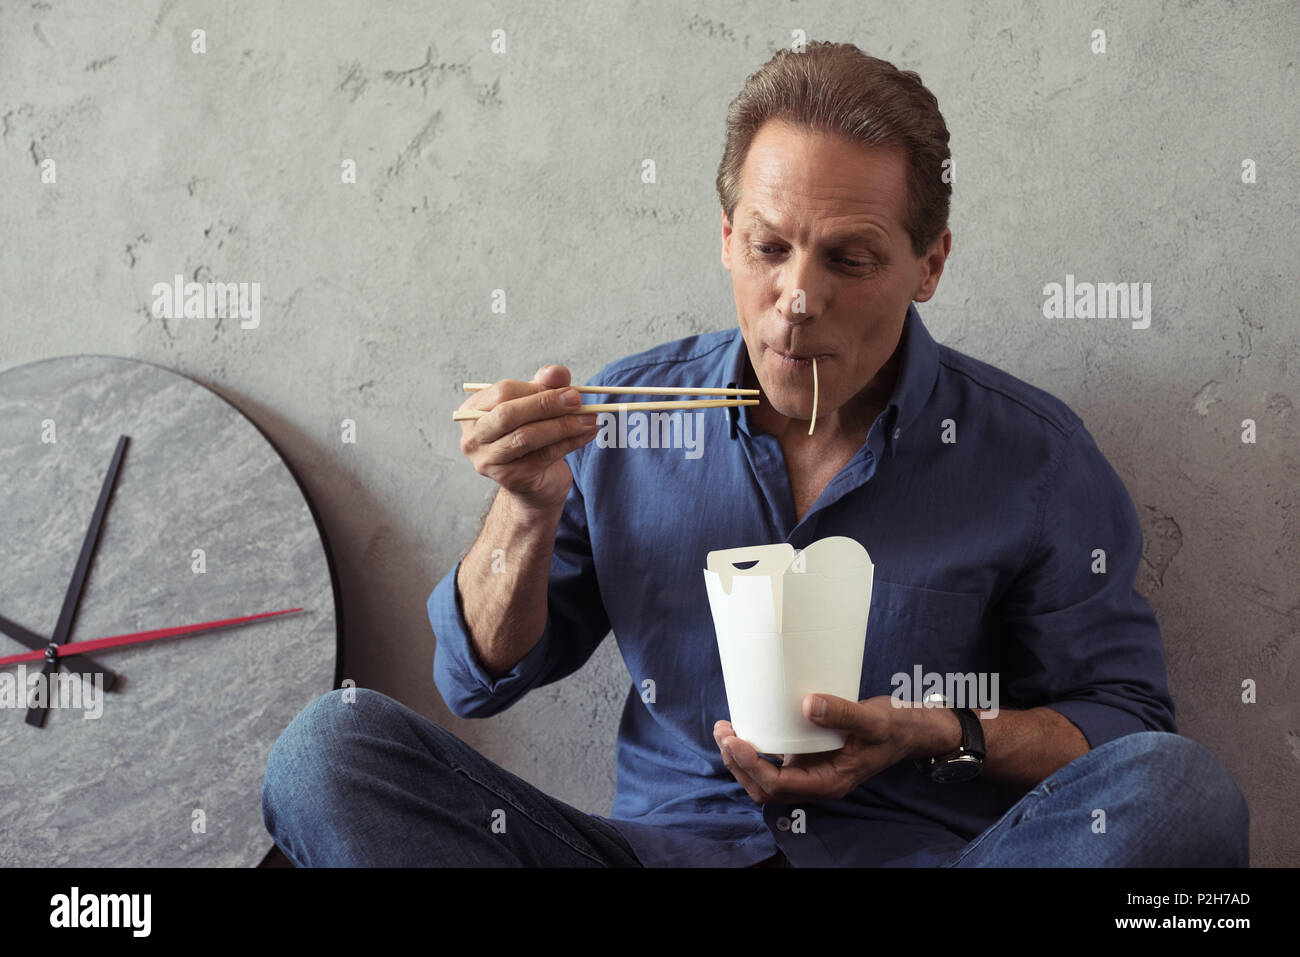 casual middle aged man eating noodles with chopsticks Stock Photo